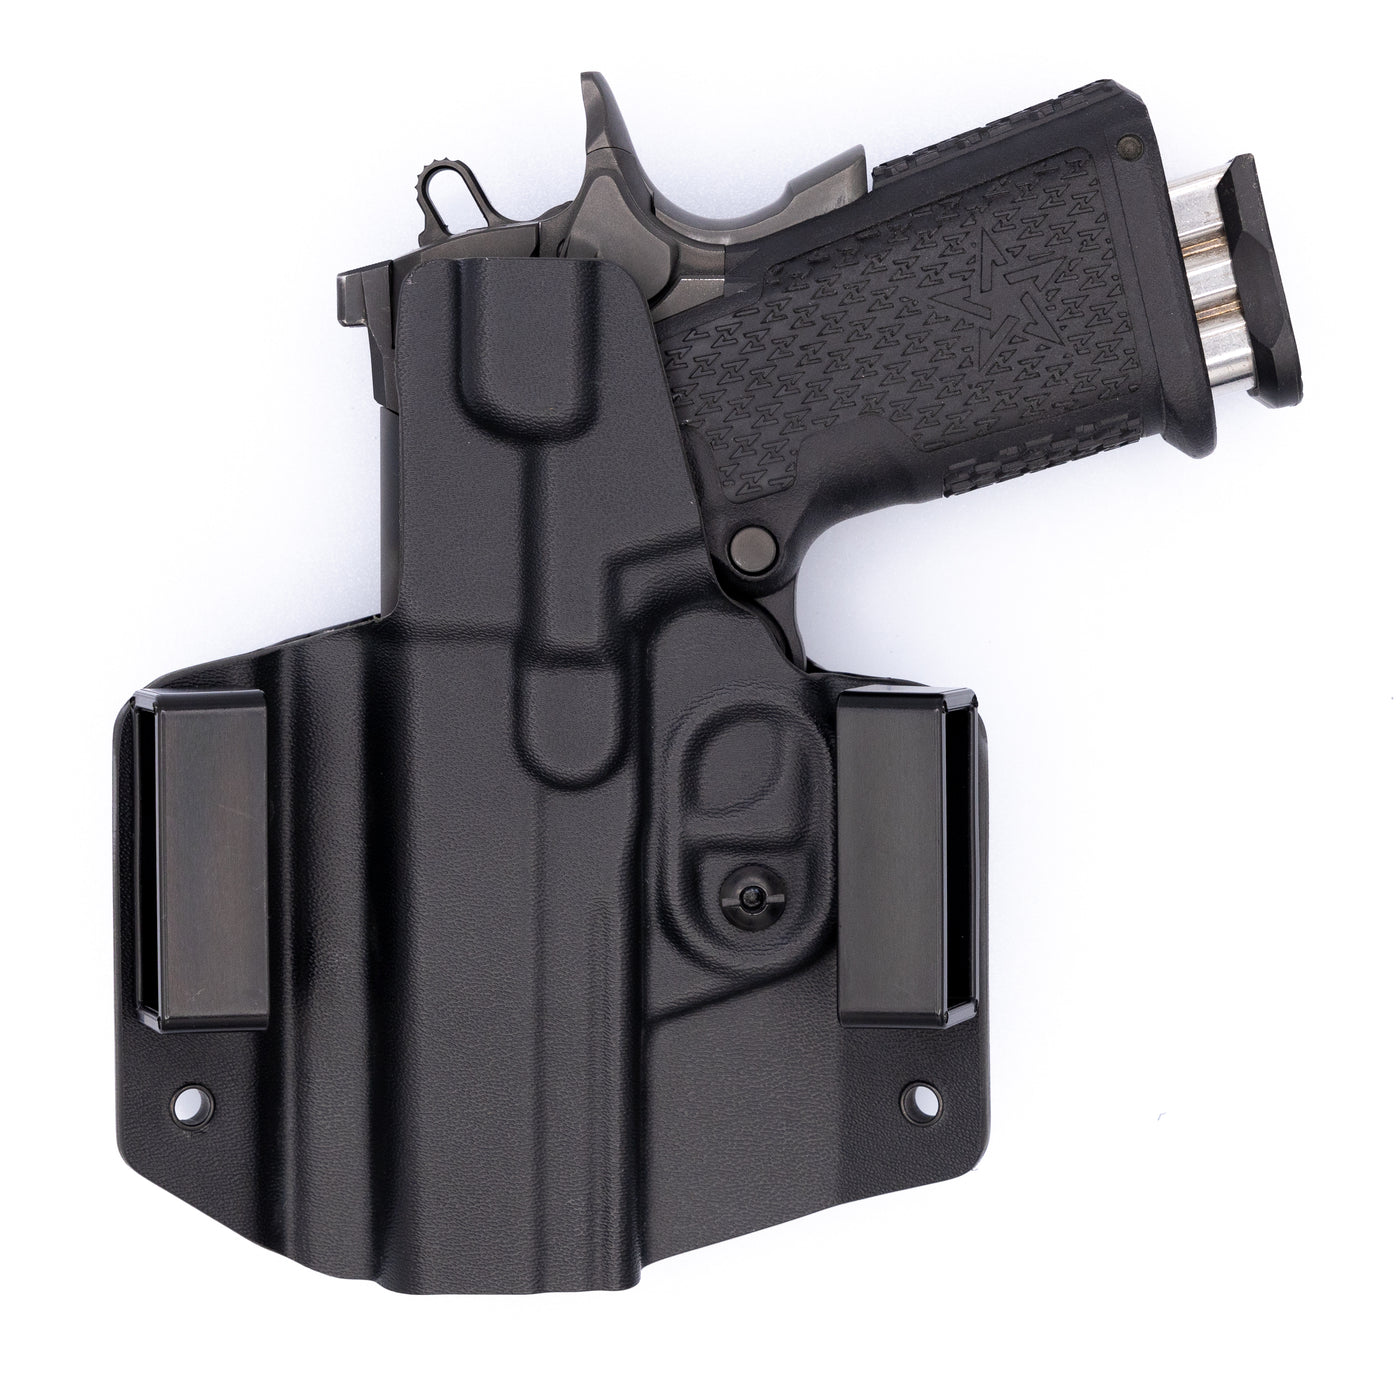 Adjustable retention holster for Staccato C2. 